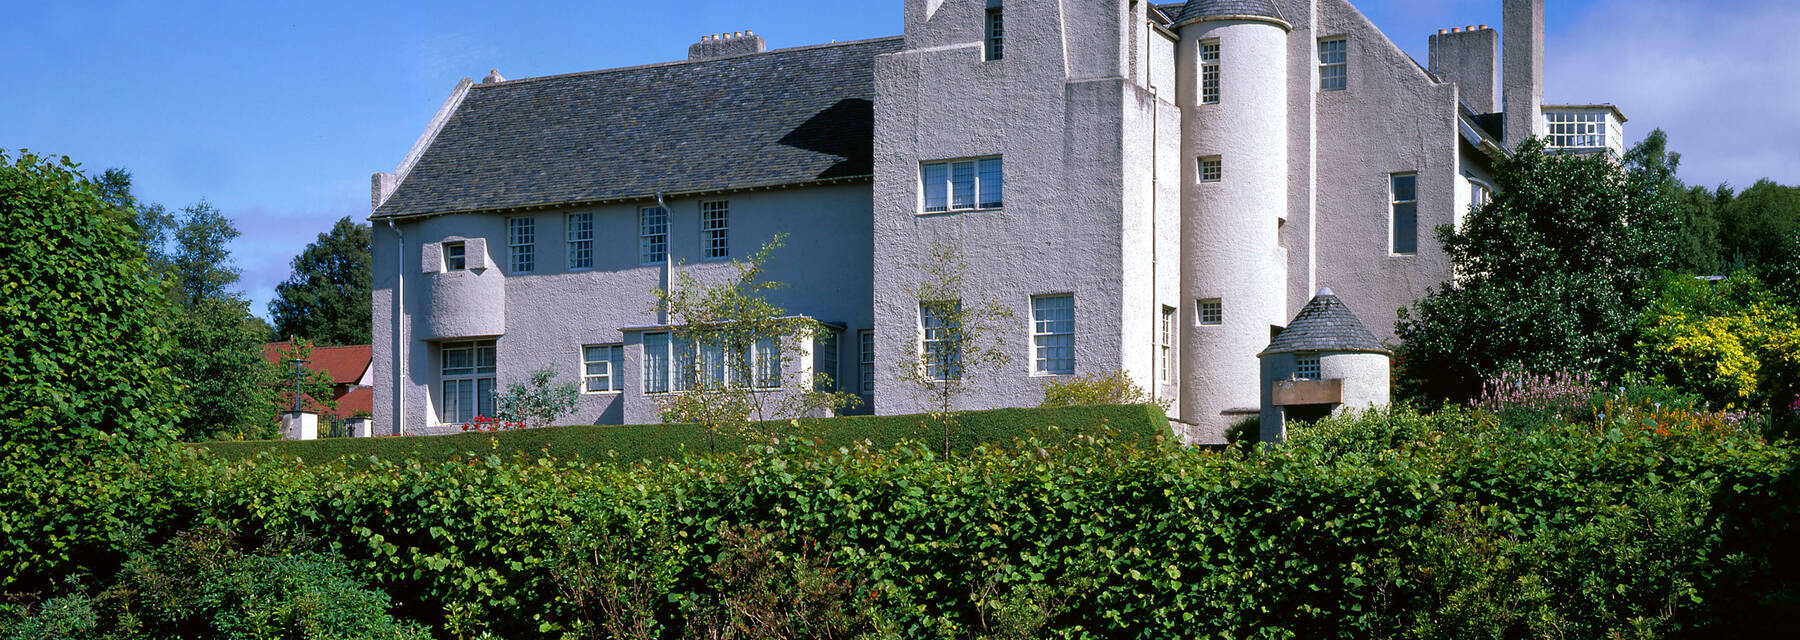 An exterior view of the Hill House on a sunny day, from the garden below. The white cement-harled walls and grey slate roof tiles stand out against the bright blue sky.